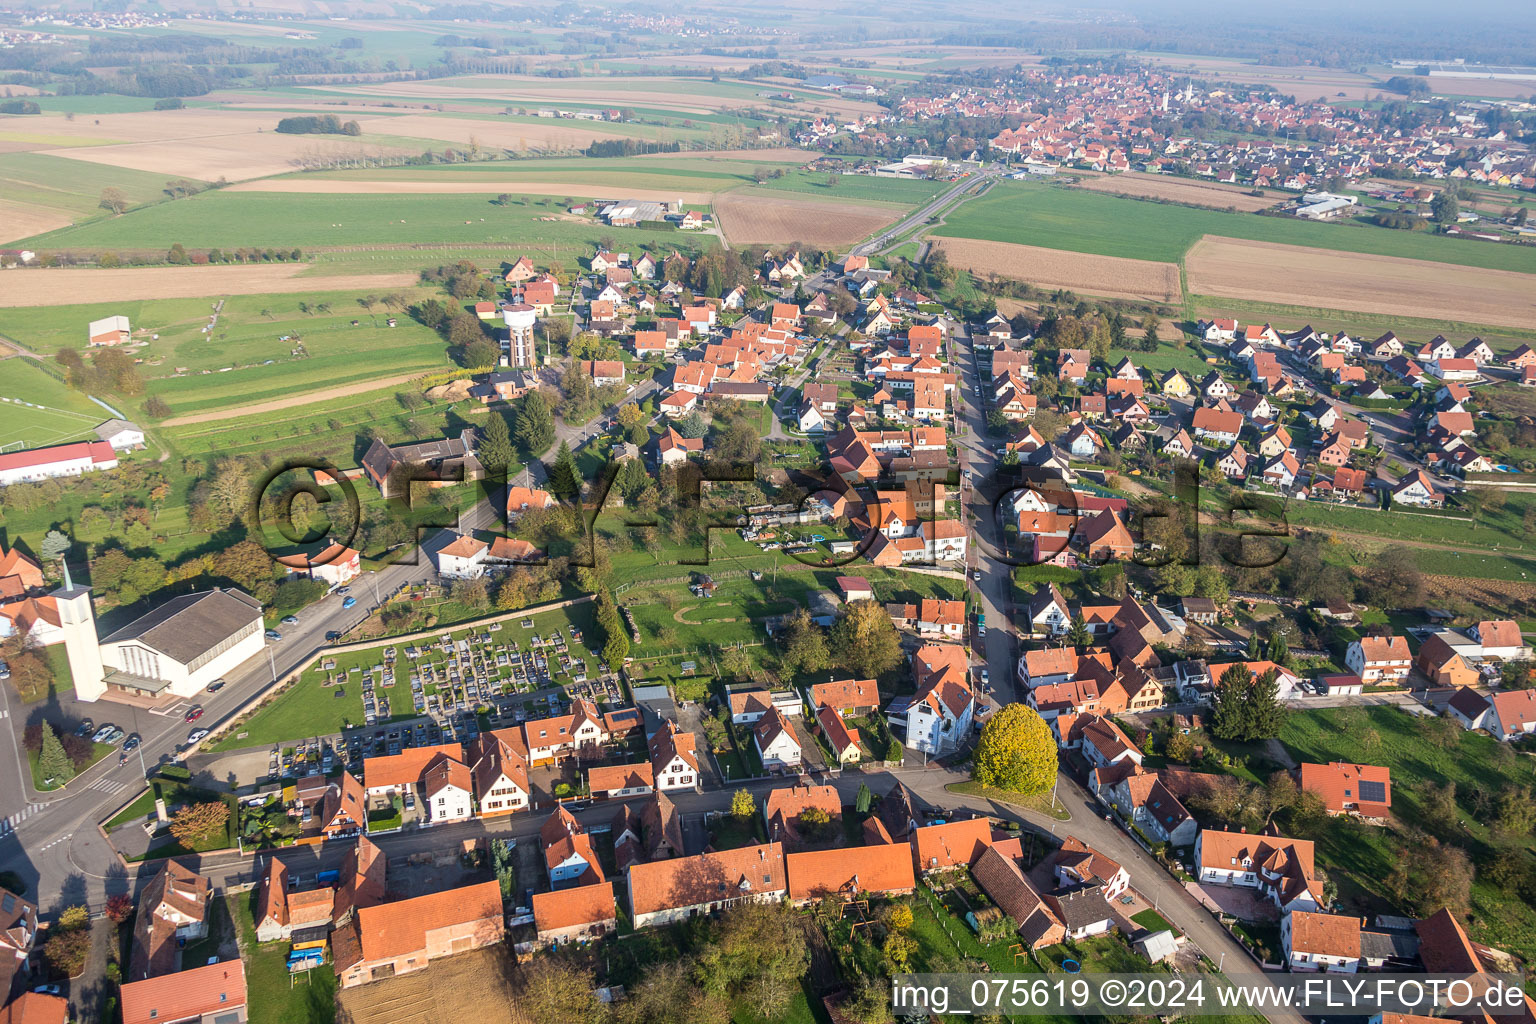 Aerial photograpy of Church building Eglise protestante de Rittershoffen in Rittershoffen in Grand Est, France